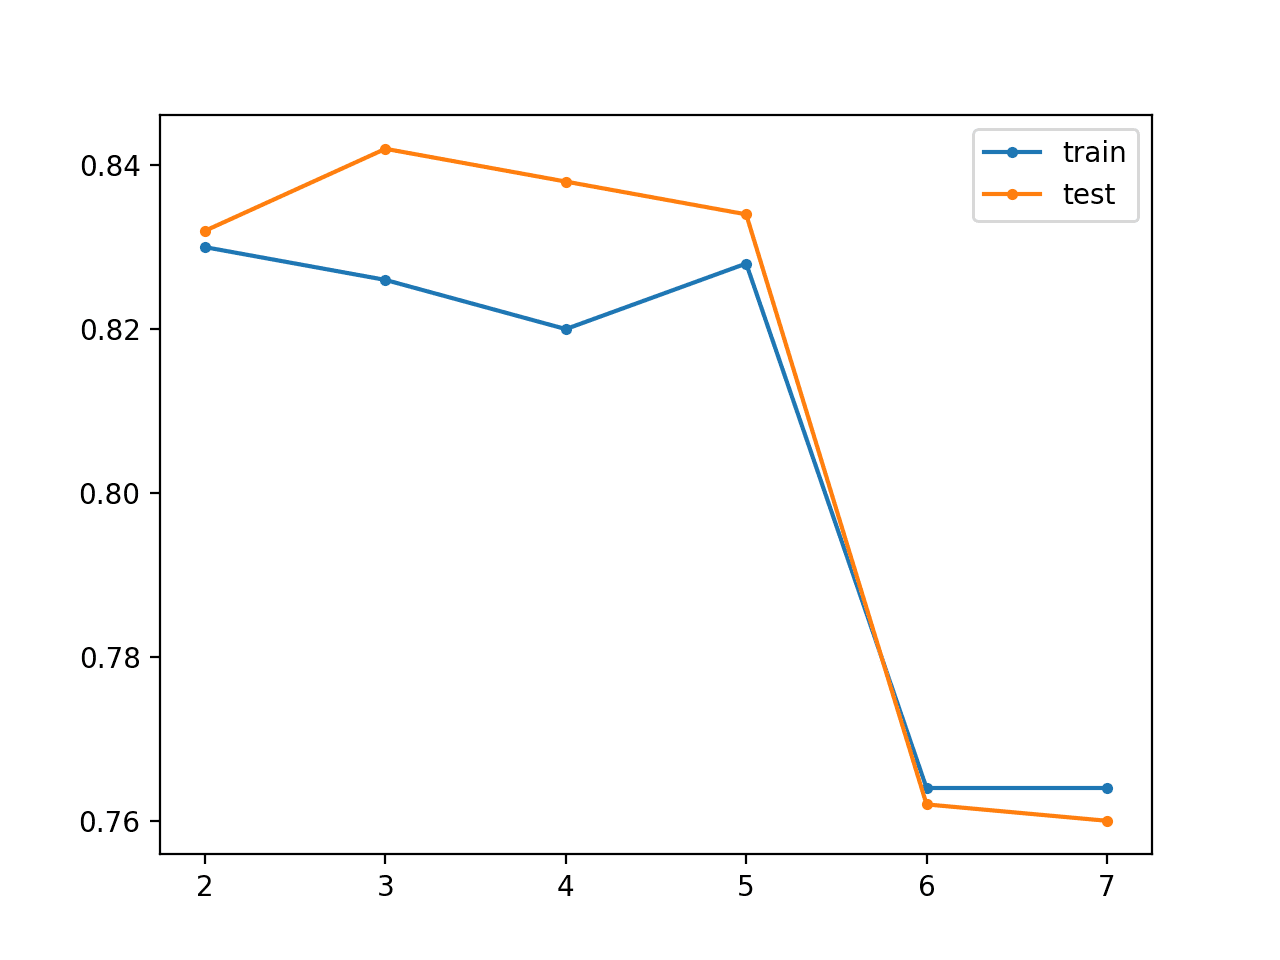 Line Plot for Unsupervised Greedy Layer-Wise Pretraining Showing Model Layers vs Train and Test Set Classification Accuracy on the Blobs Classification Problem